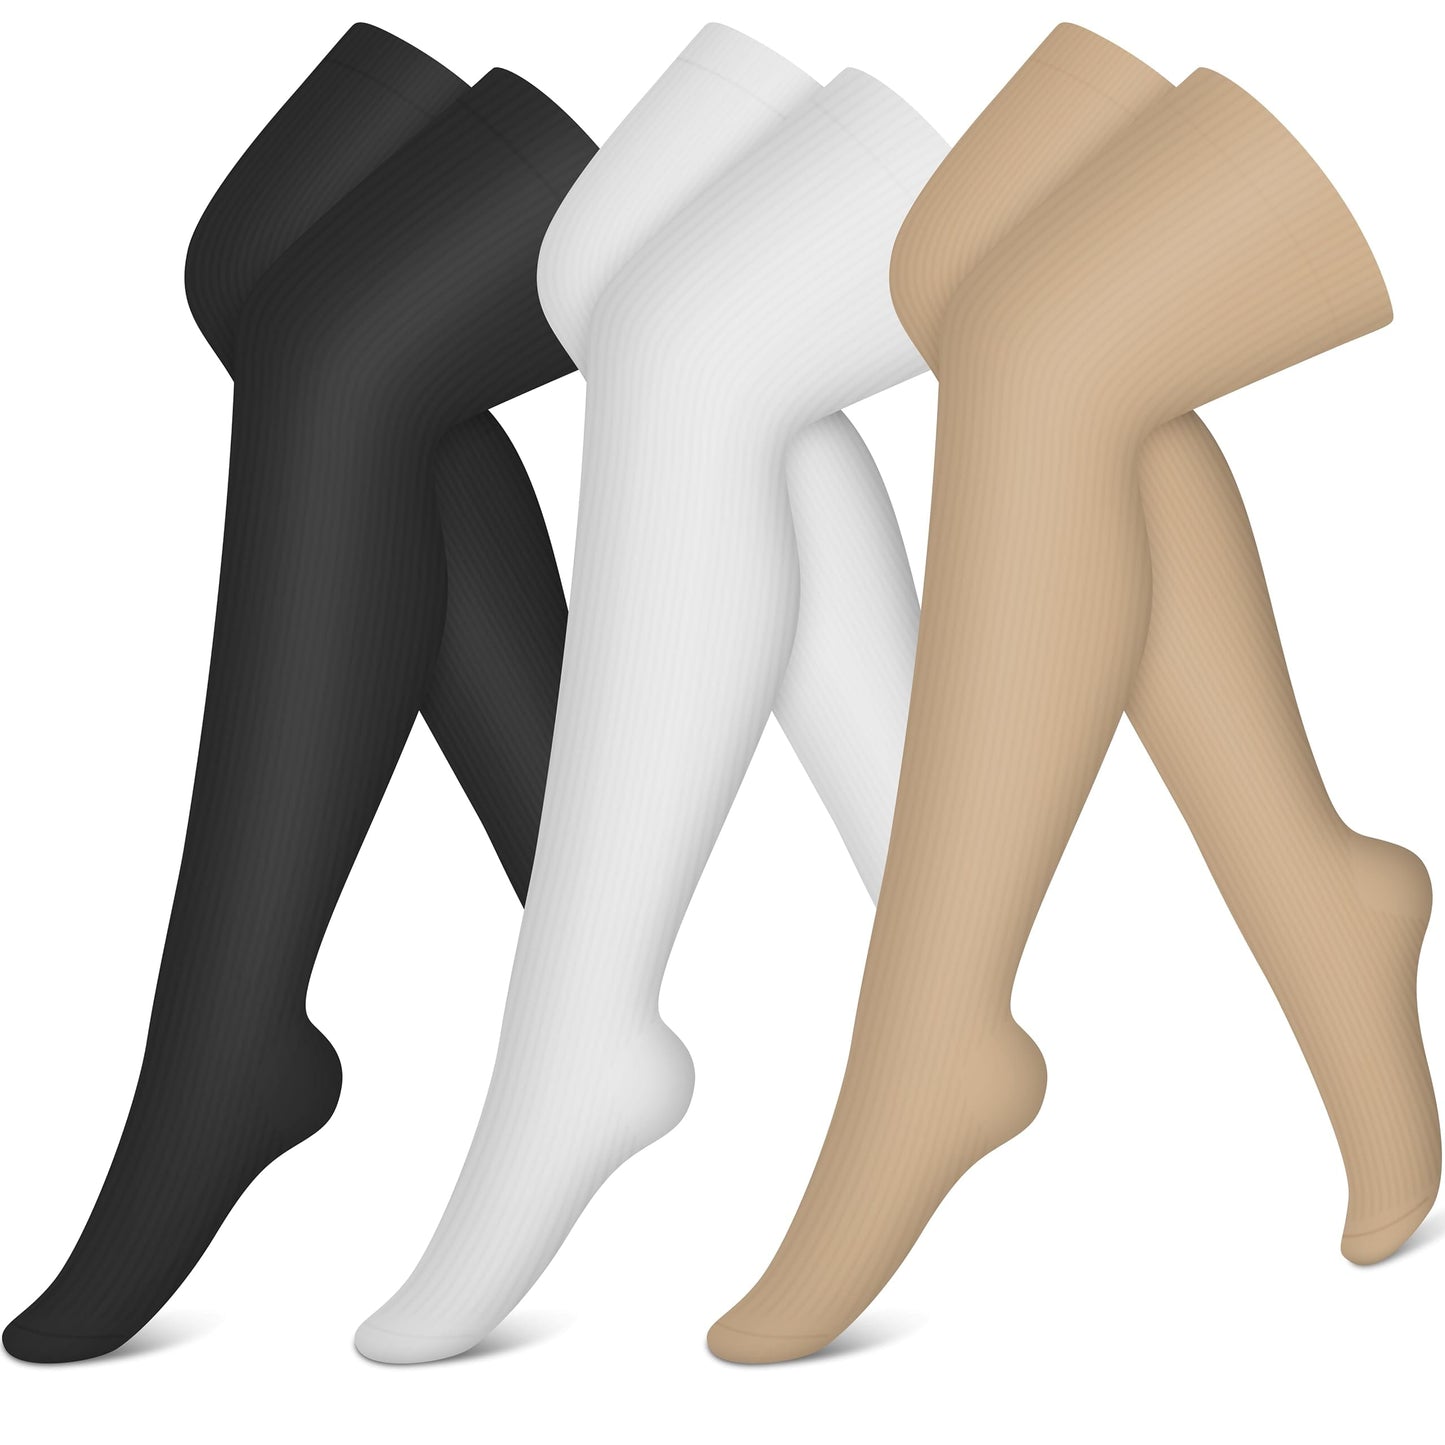 Thigh High Compression Socks for Women and Men 15-20 mmHg Boost Circulation